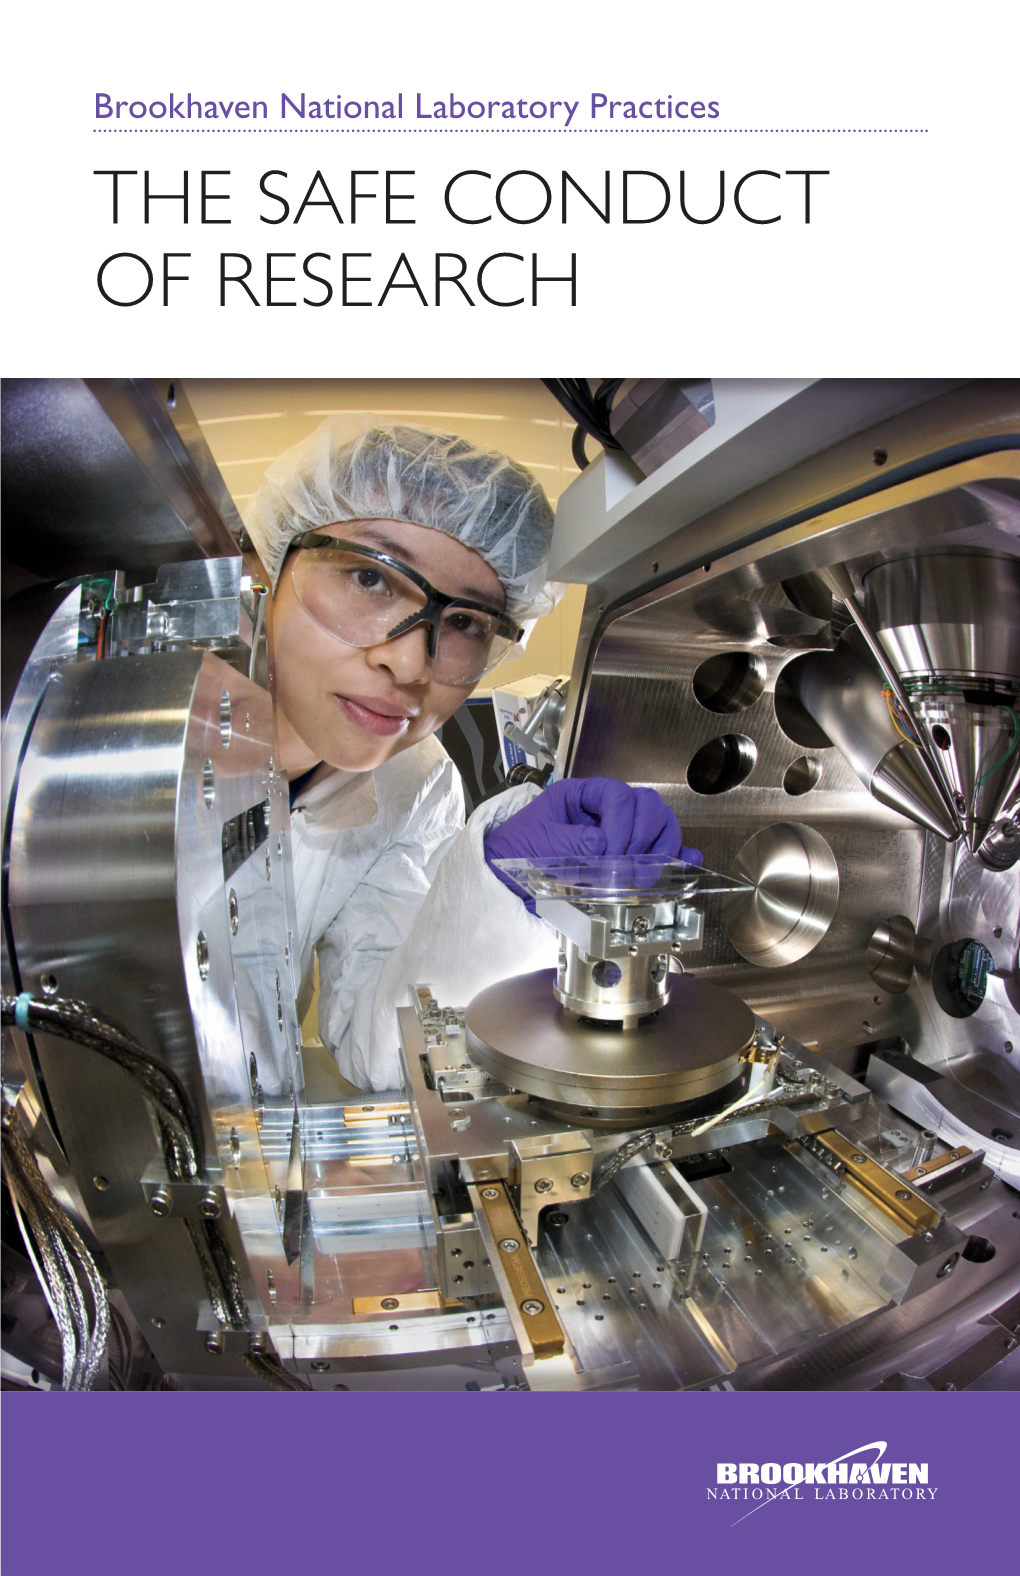 The Safe Conduct of Research on the Cover